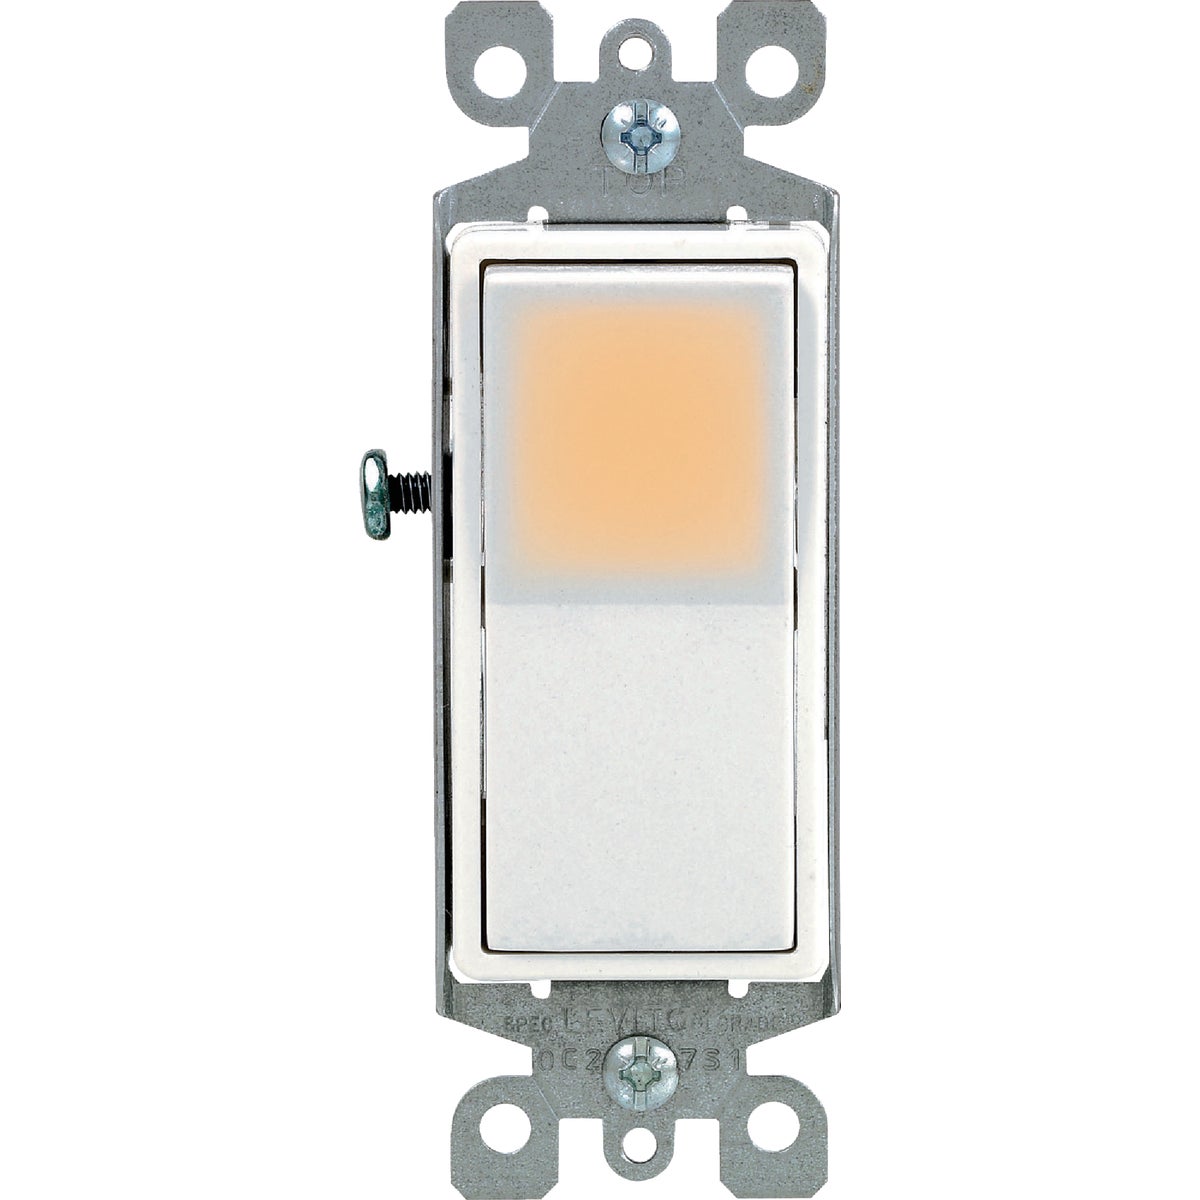 Item 524132, Illuminated single pole Decora switch allows faster installation with 